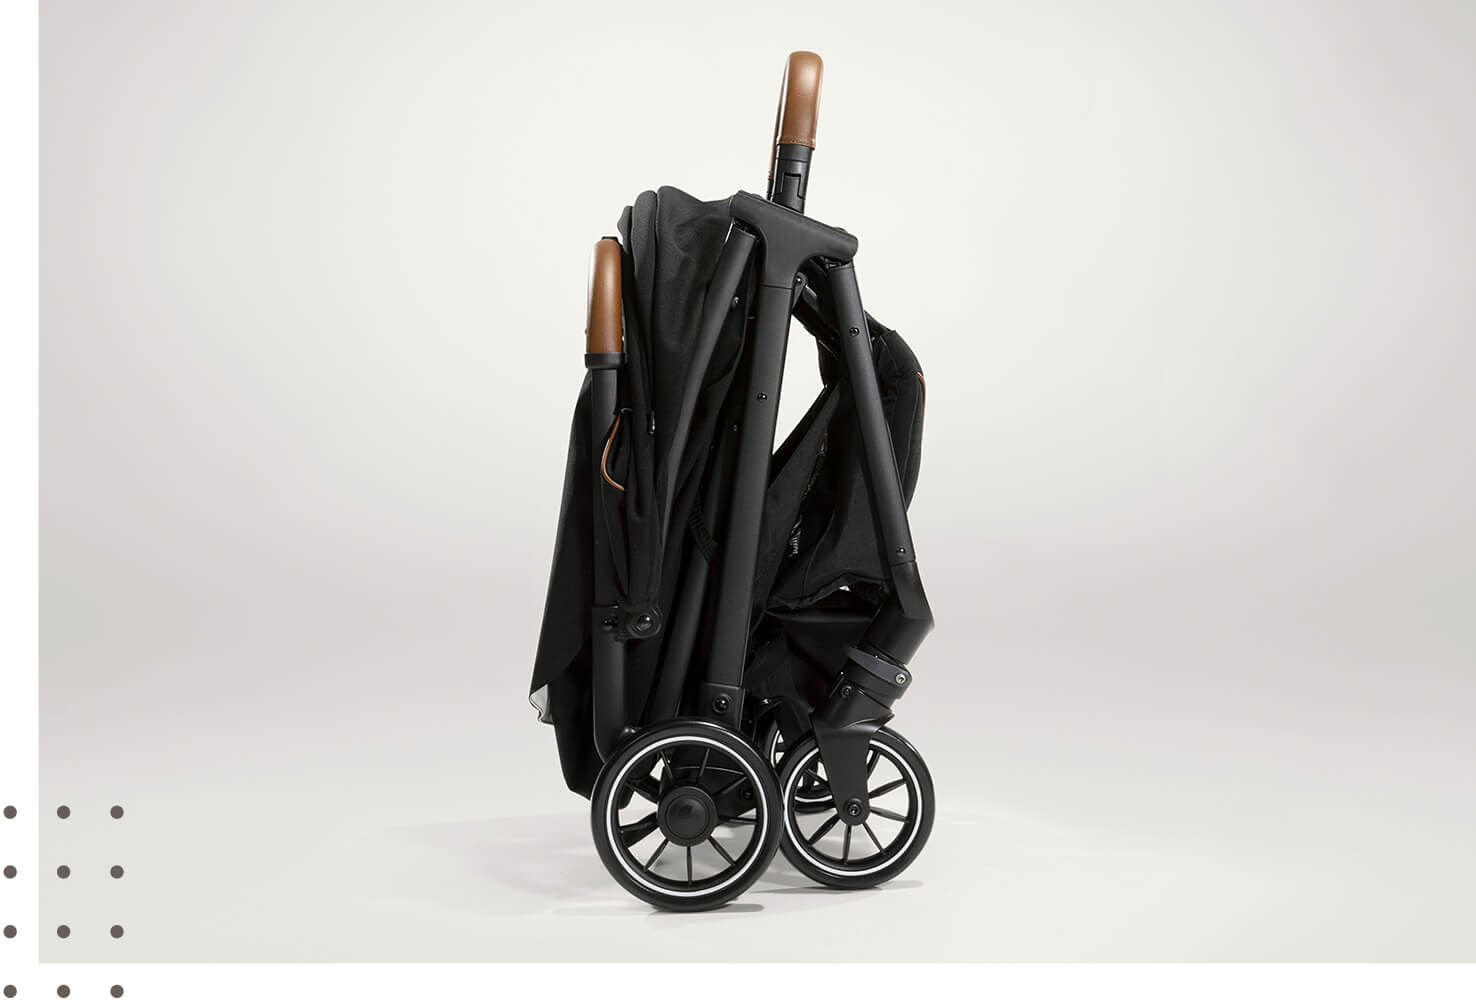 A folded Joie Parcel pushchair on a taupe background.